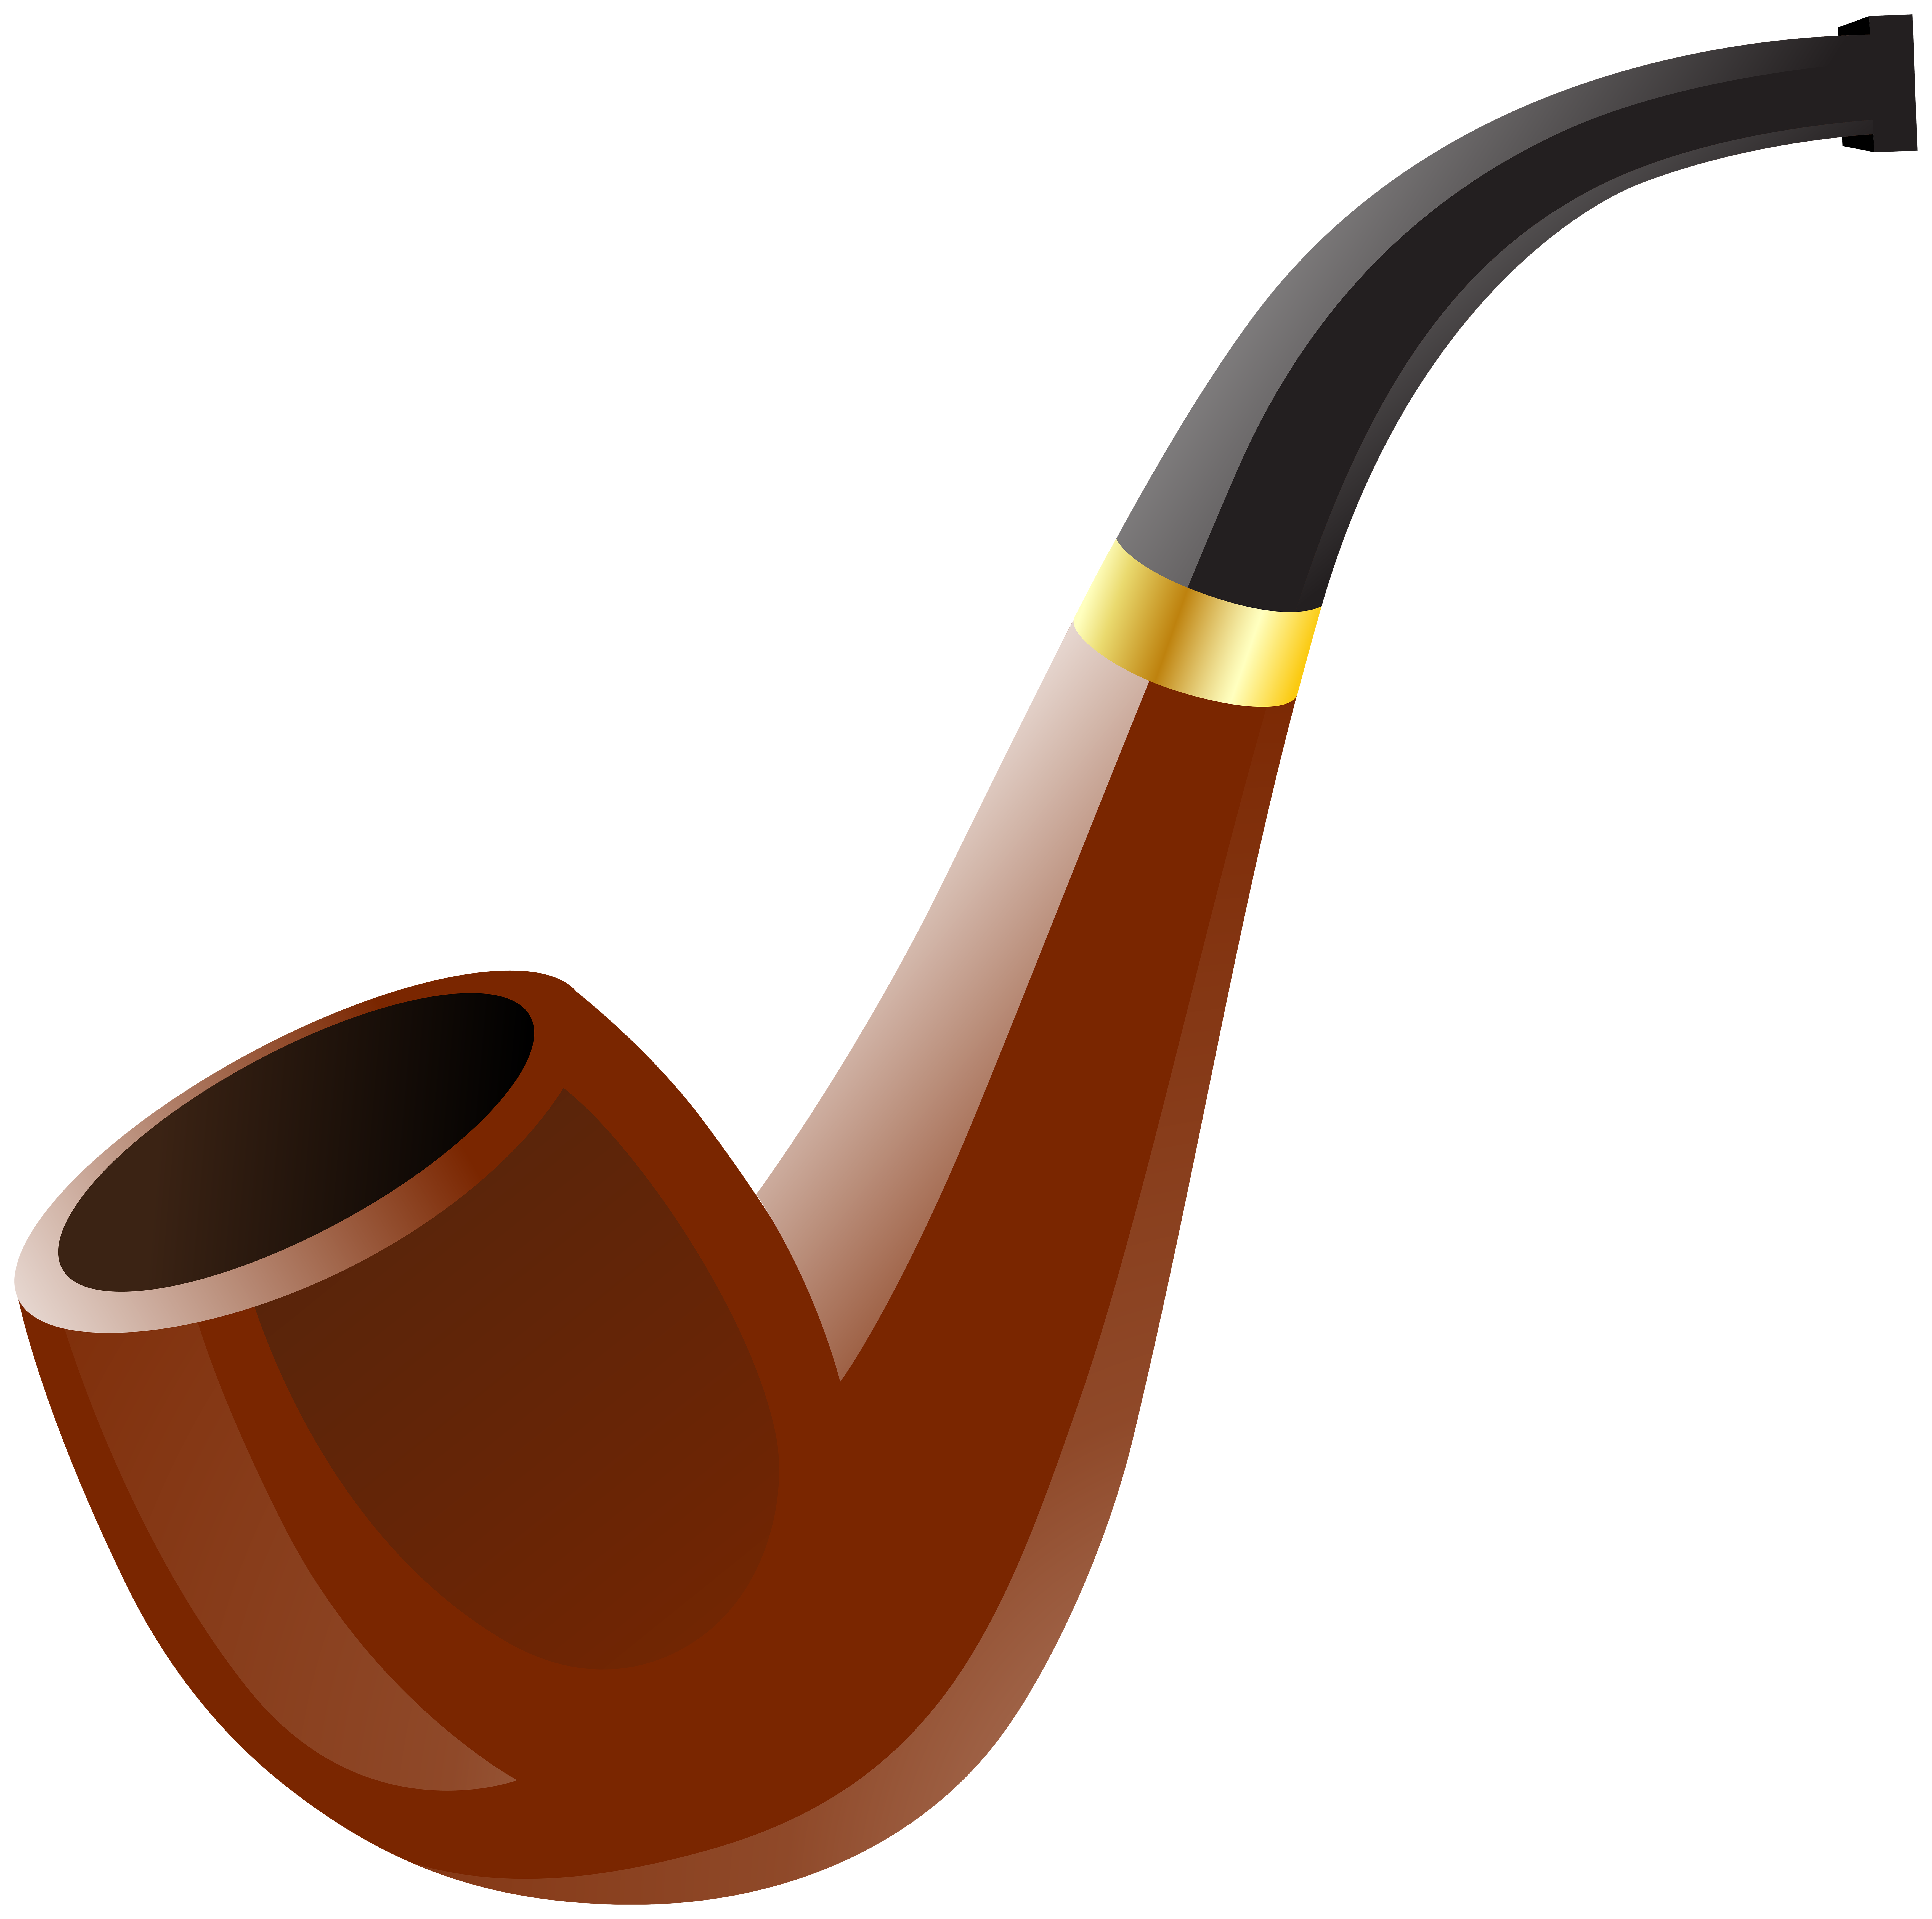 pipe clipart